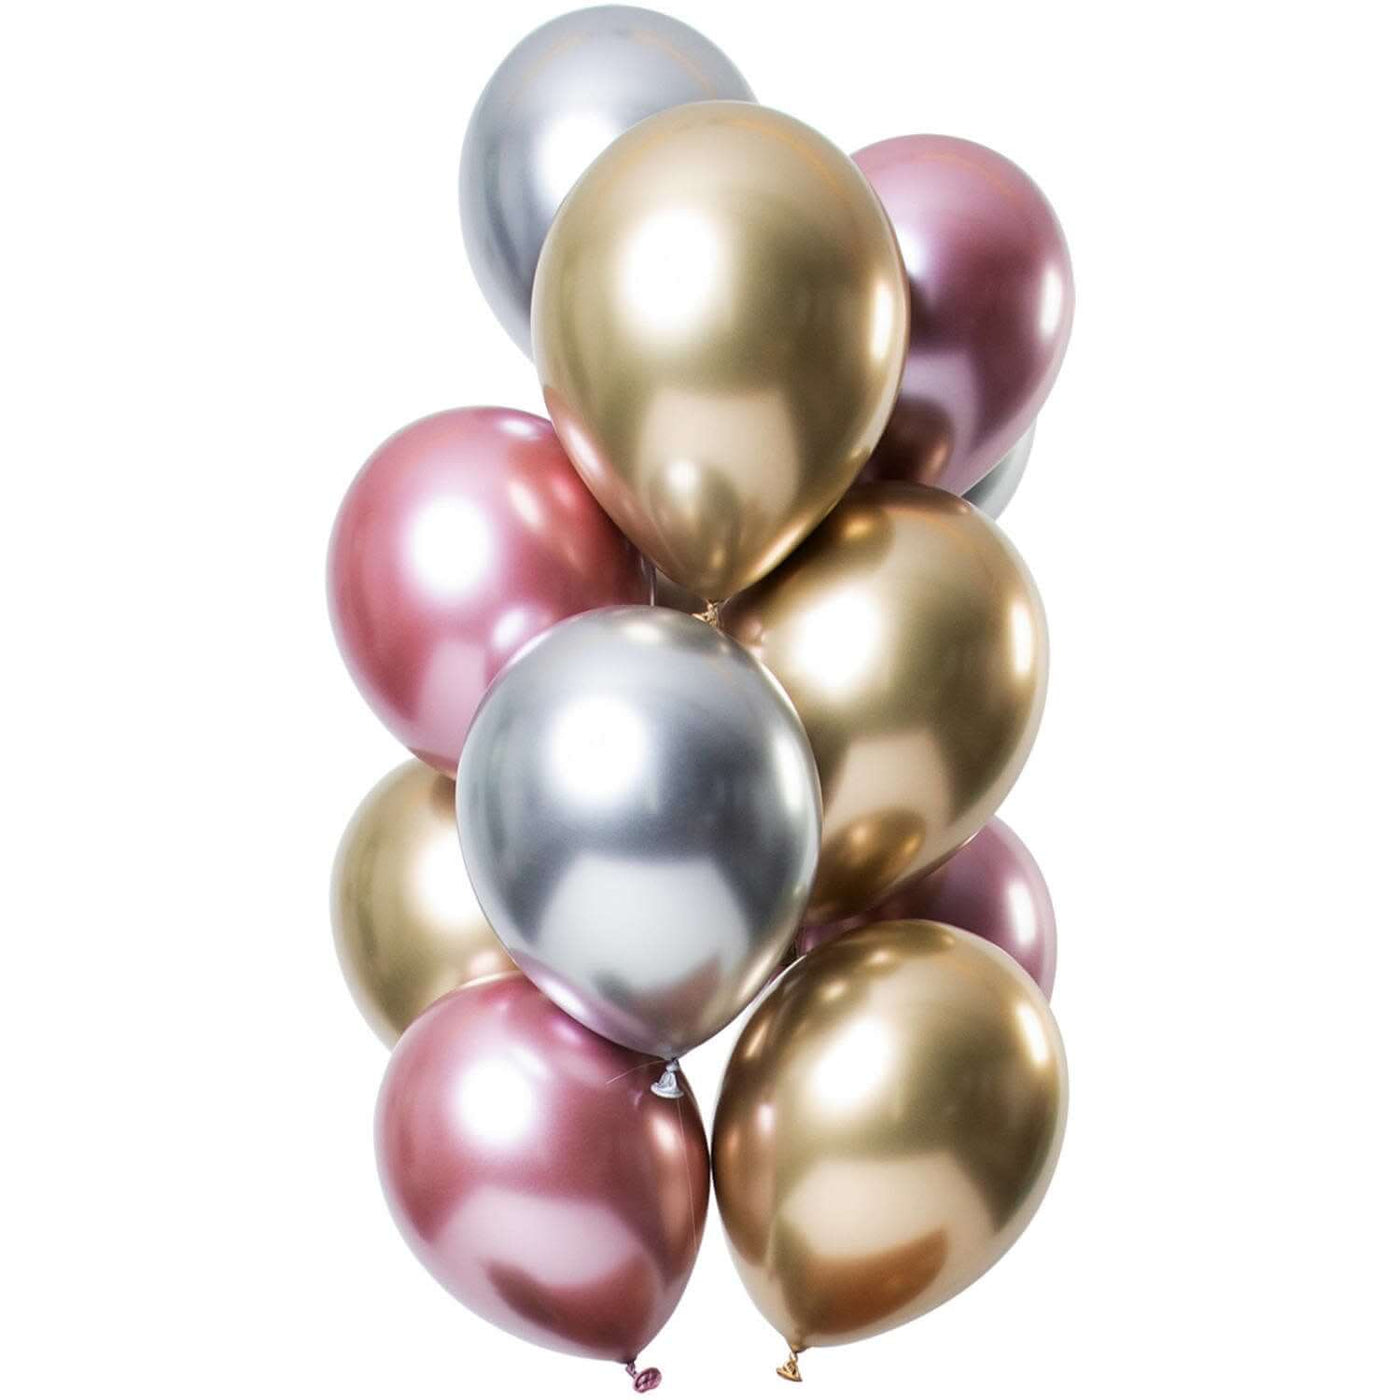 Chrome Balloons Bouquet - Shiny Inspiration Silver Gold Pink